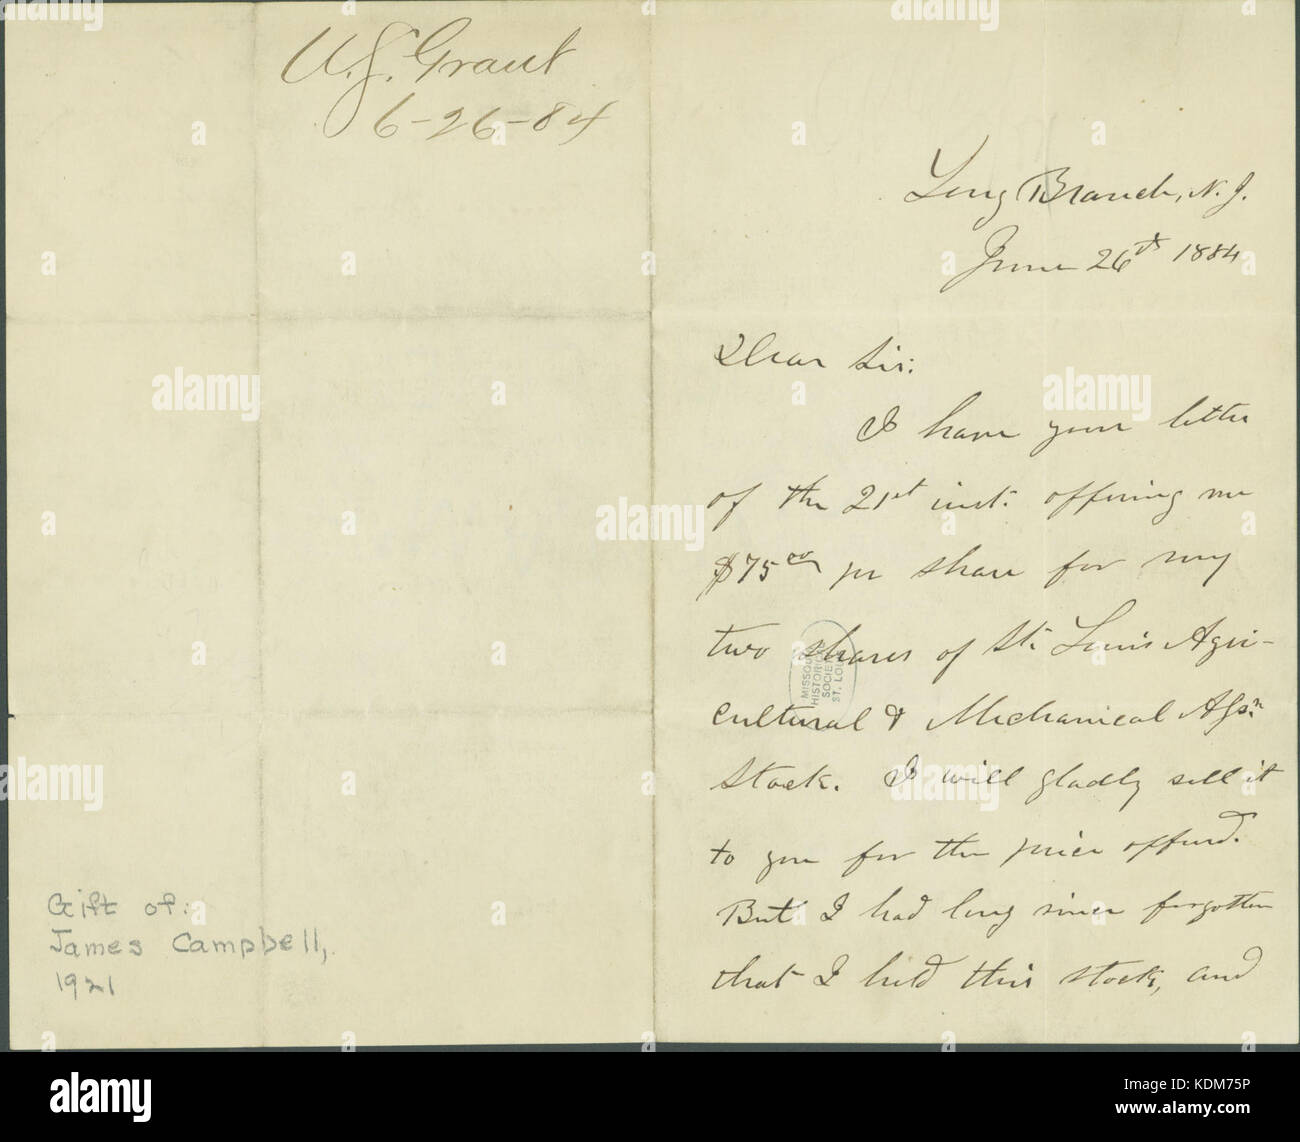 Letter signed U.S. Grant, Long Branch, N.J., to James Campbell, St. Louis, Mo., June 26, 1884 Stock Photo